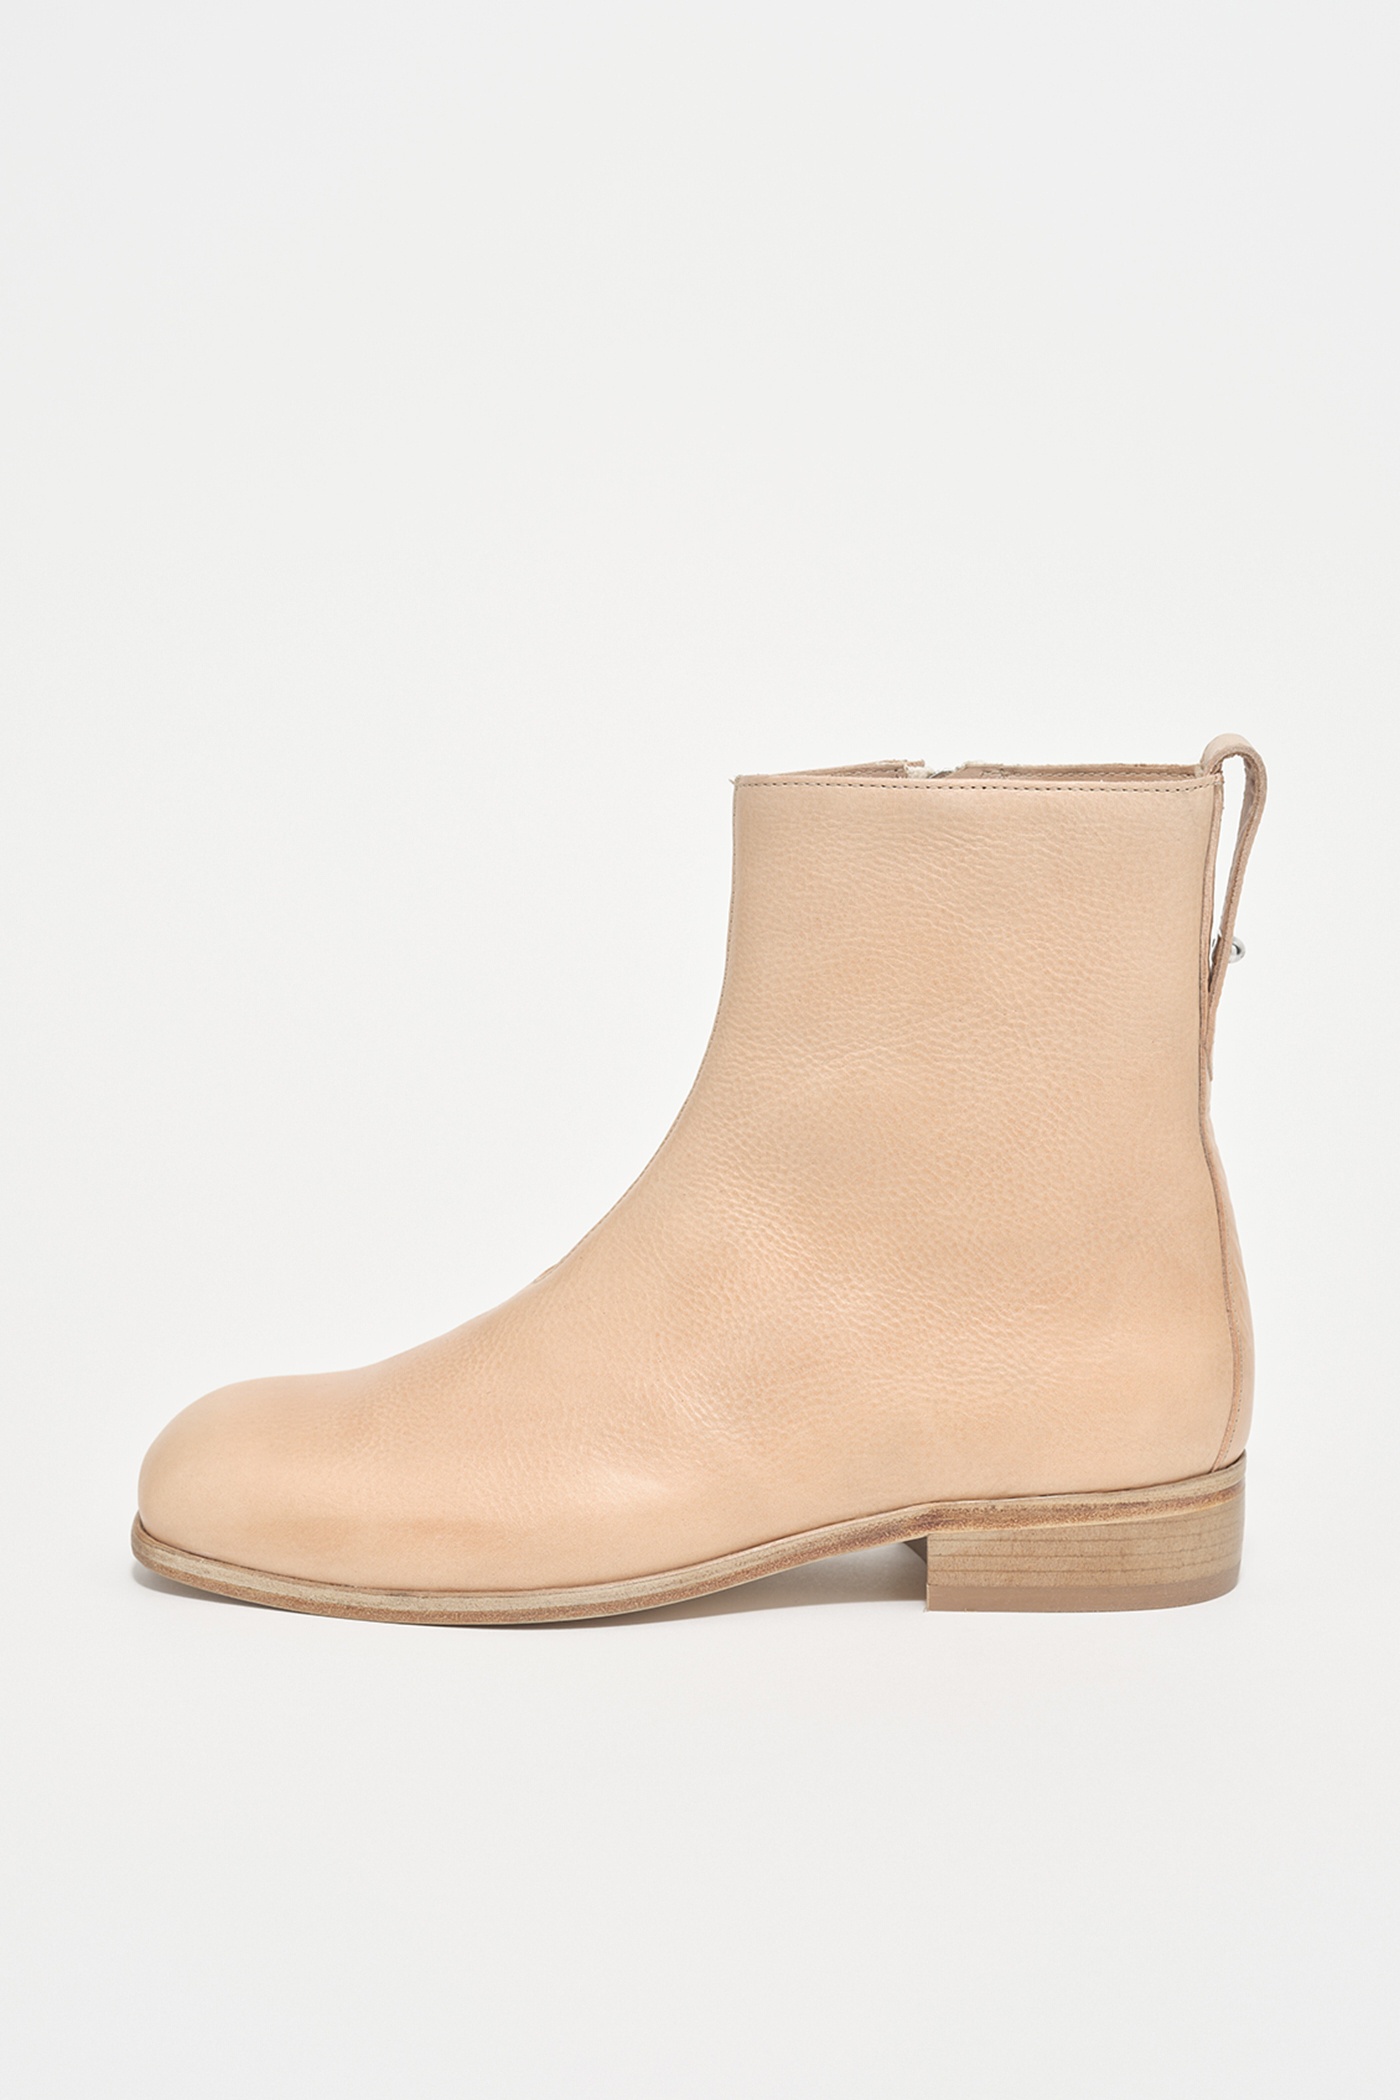 Michaelis Boot Waxy Natural Tan Leather - 1